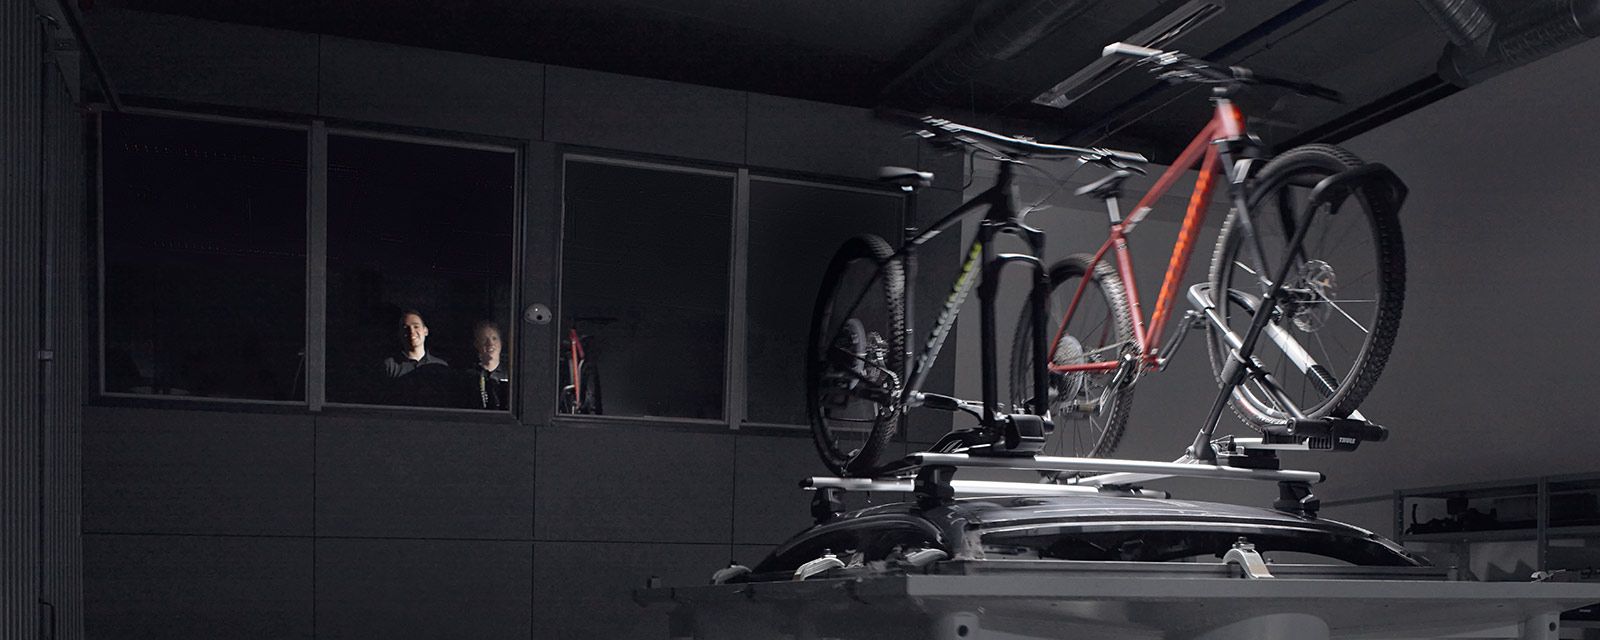 At the Thule Test Center a bike rack is going through rigorous testing.